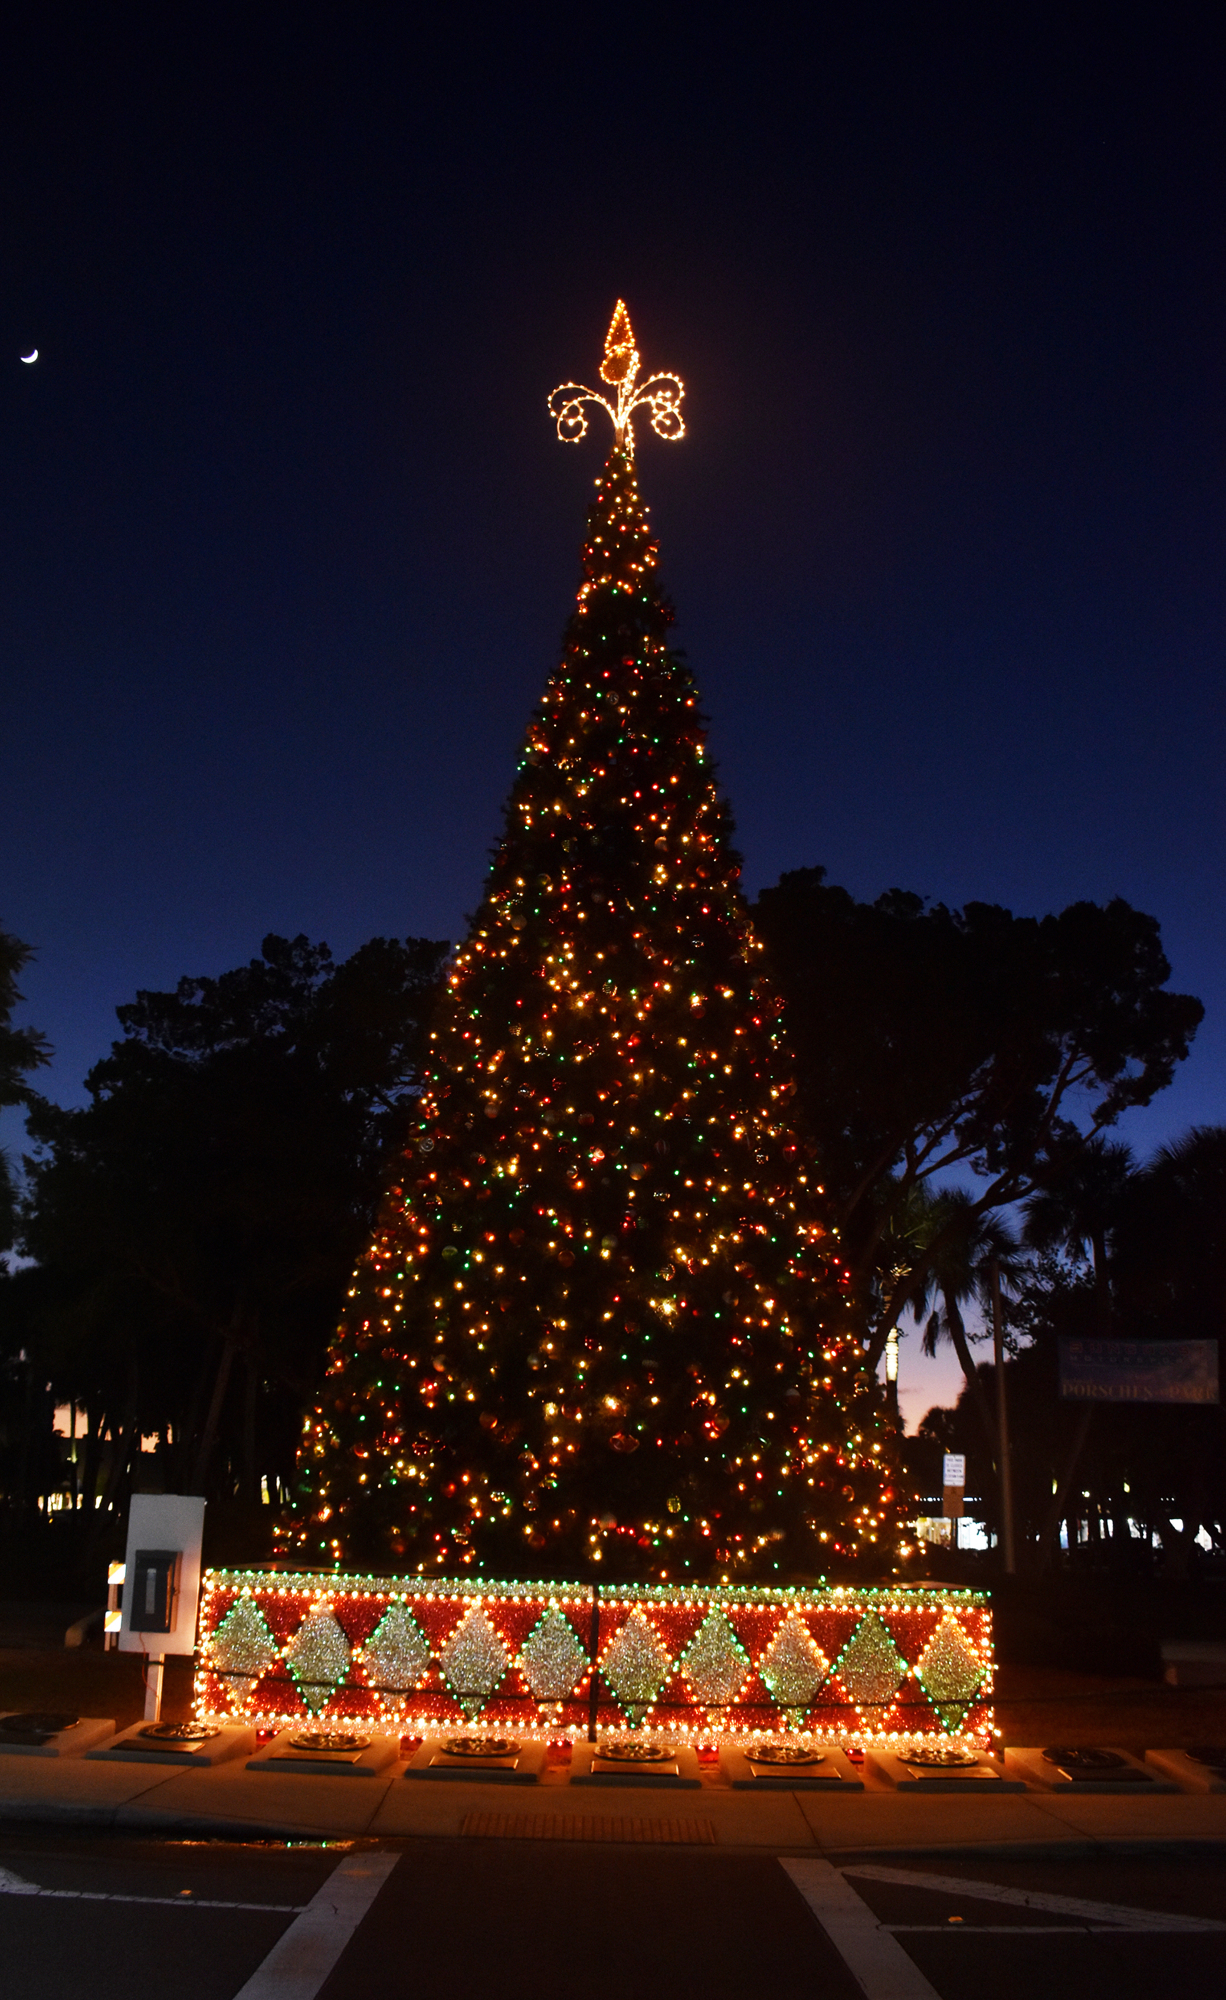 St. Armands Circle has more than just a 55-foot Christmas tree. Sprinkled around the island, are lights from restaurants and stores.